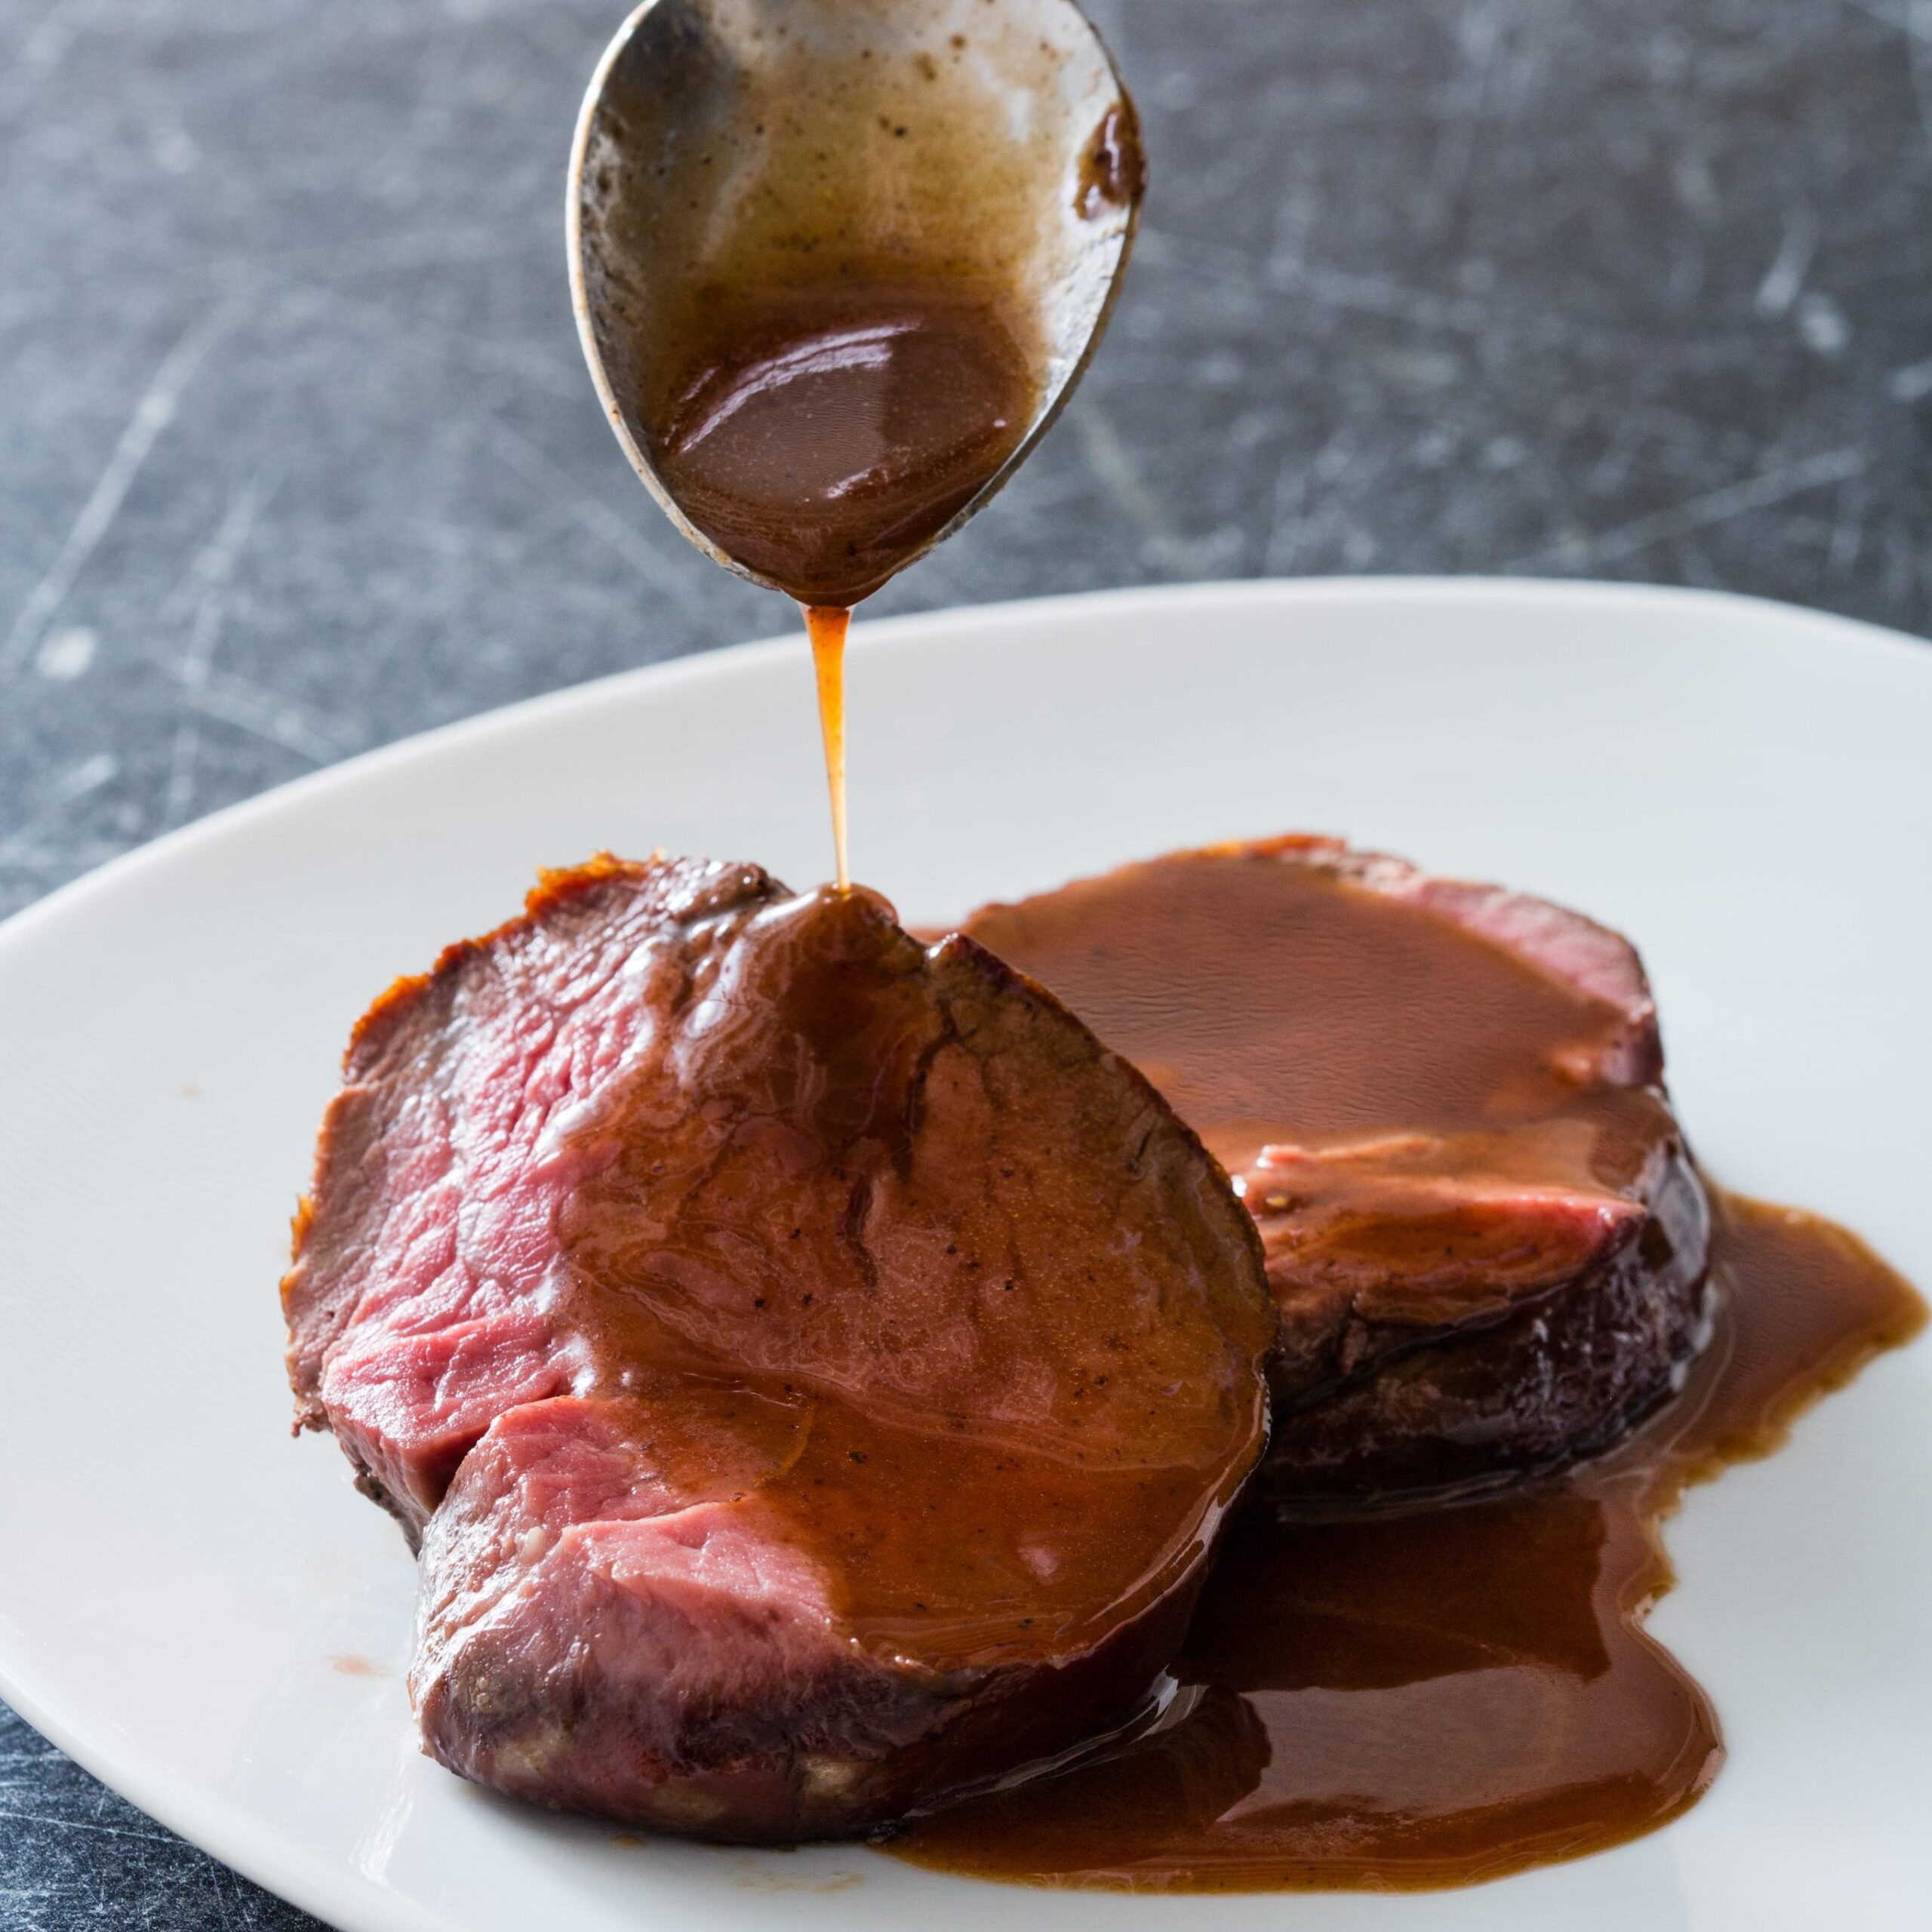  Simply mouth-watering - a perfectly cooked beef tenderloin drizzled with a delectable red wine sauce.